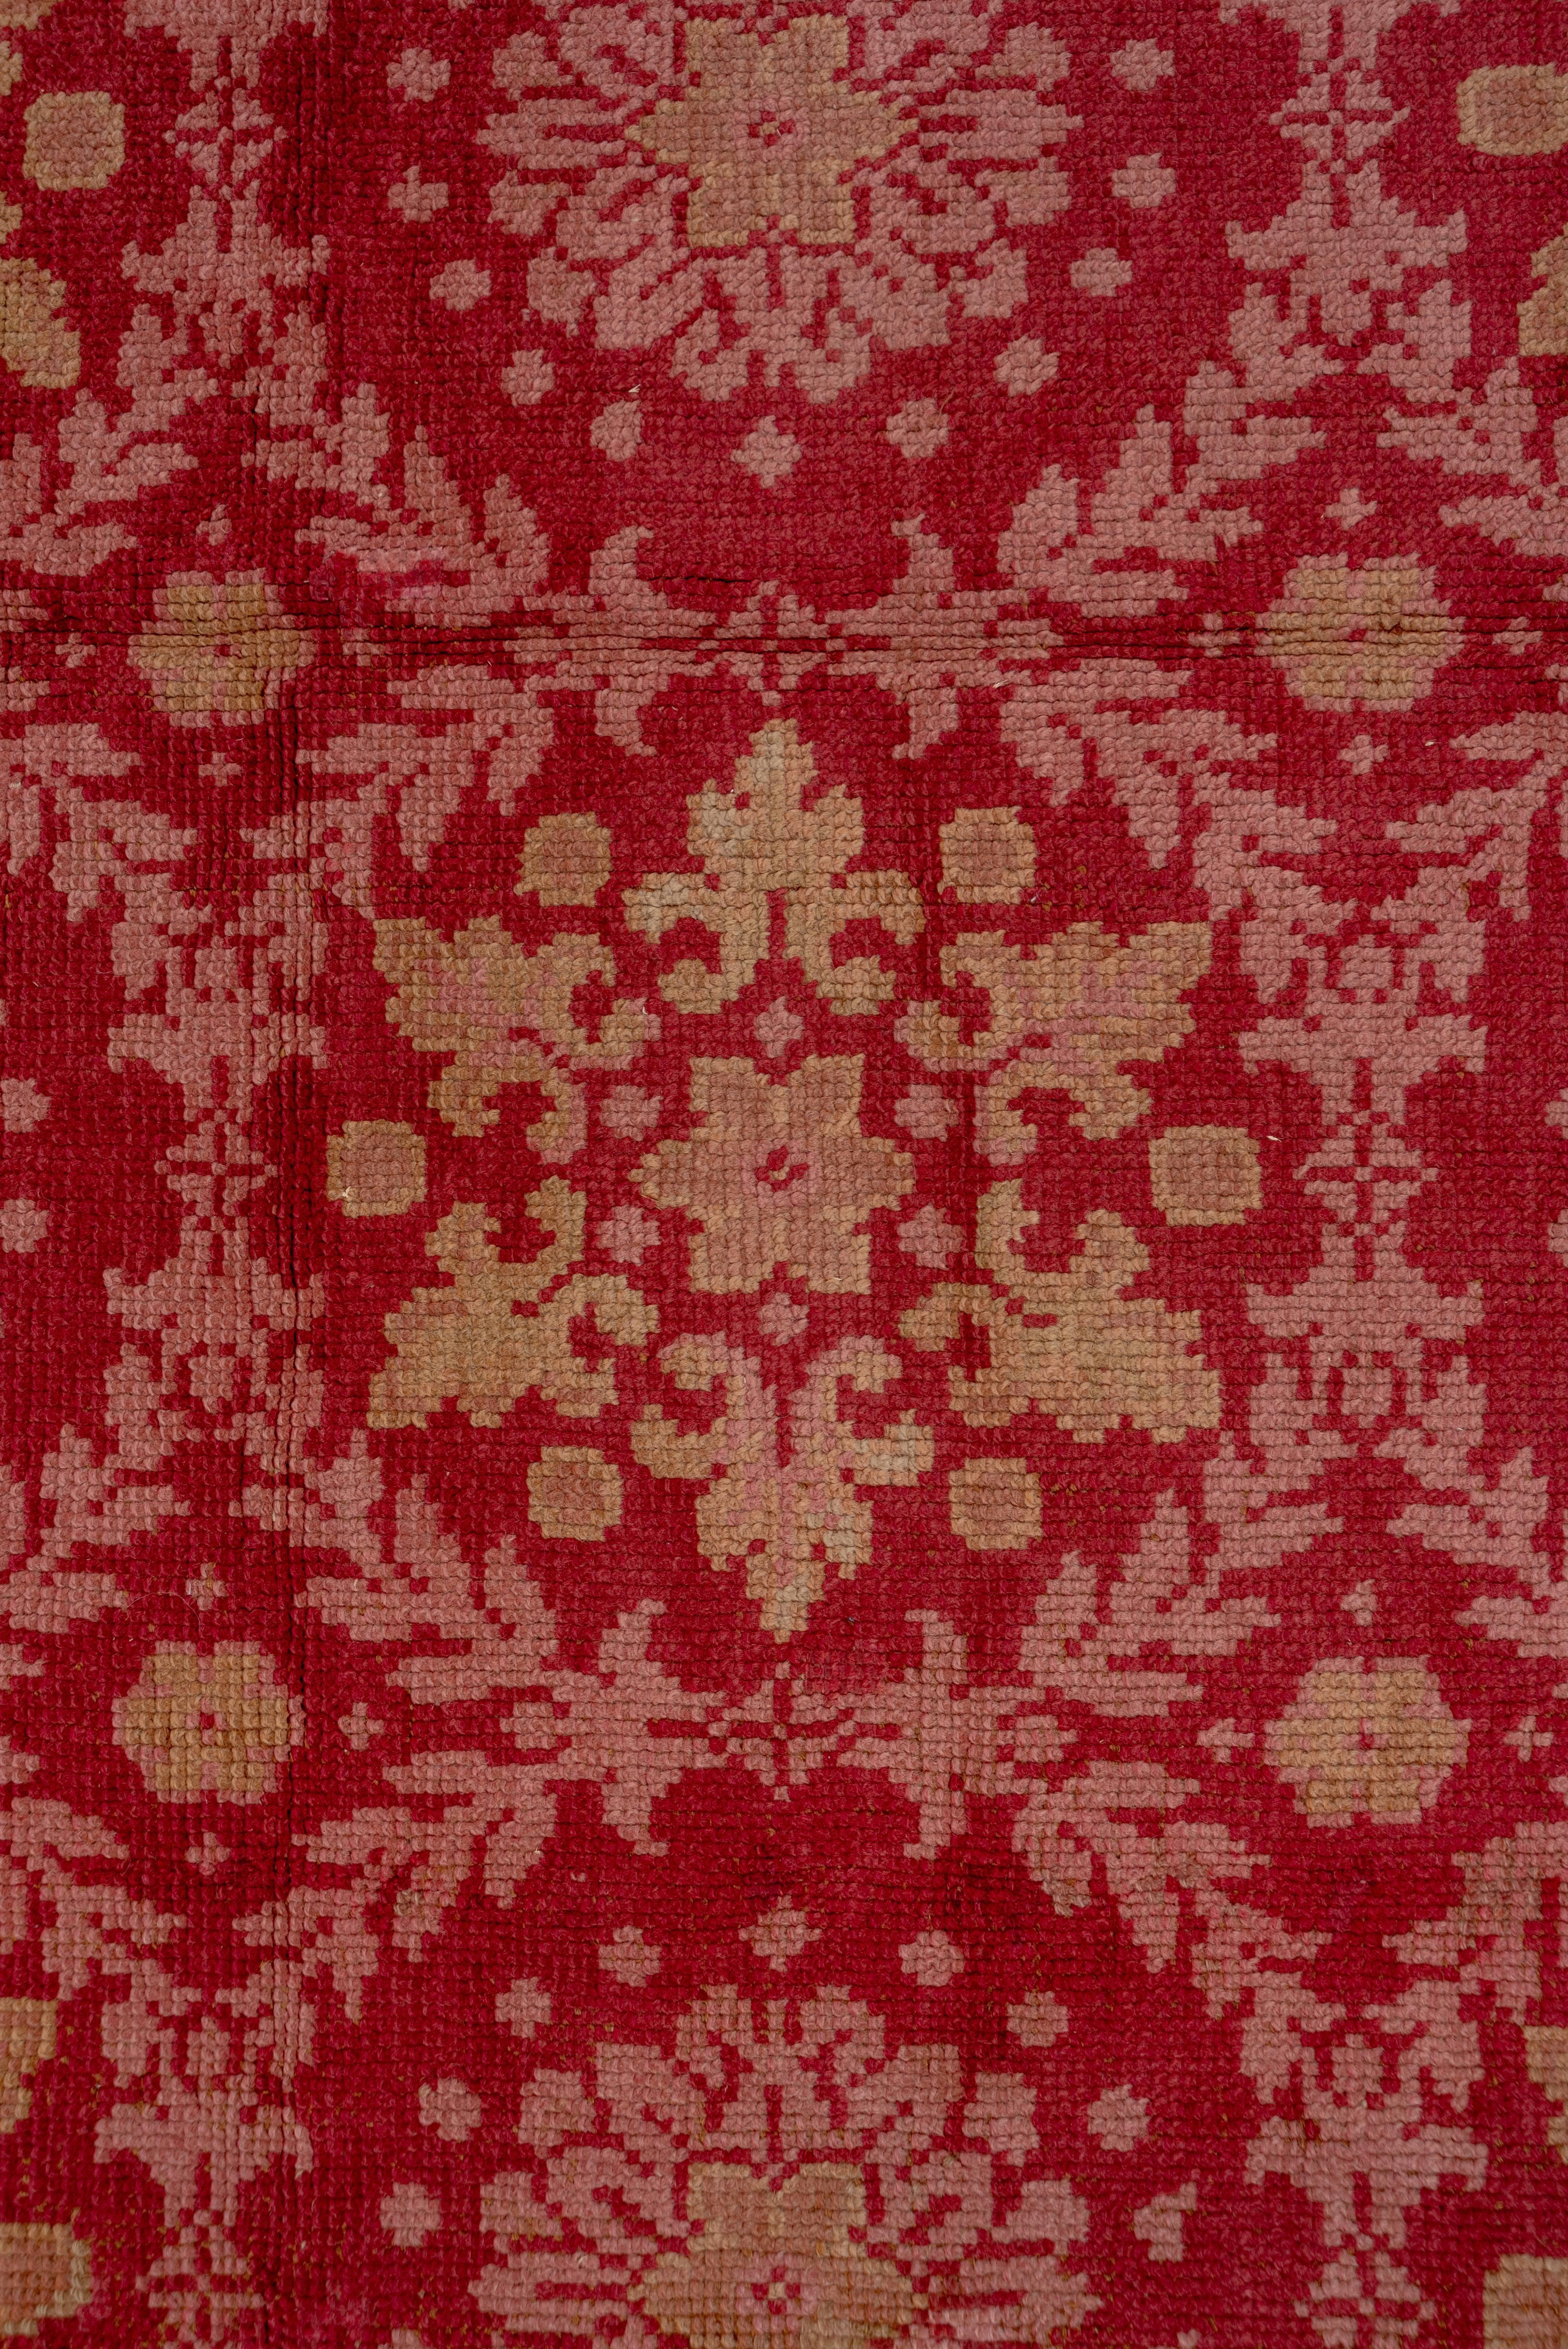 Wool Antique French Savonnerie Carpet, Red Field For Sale